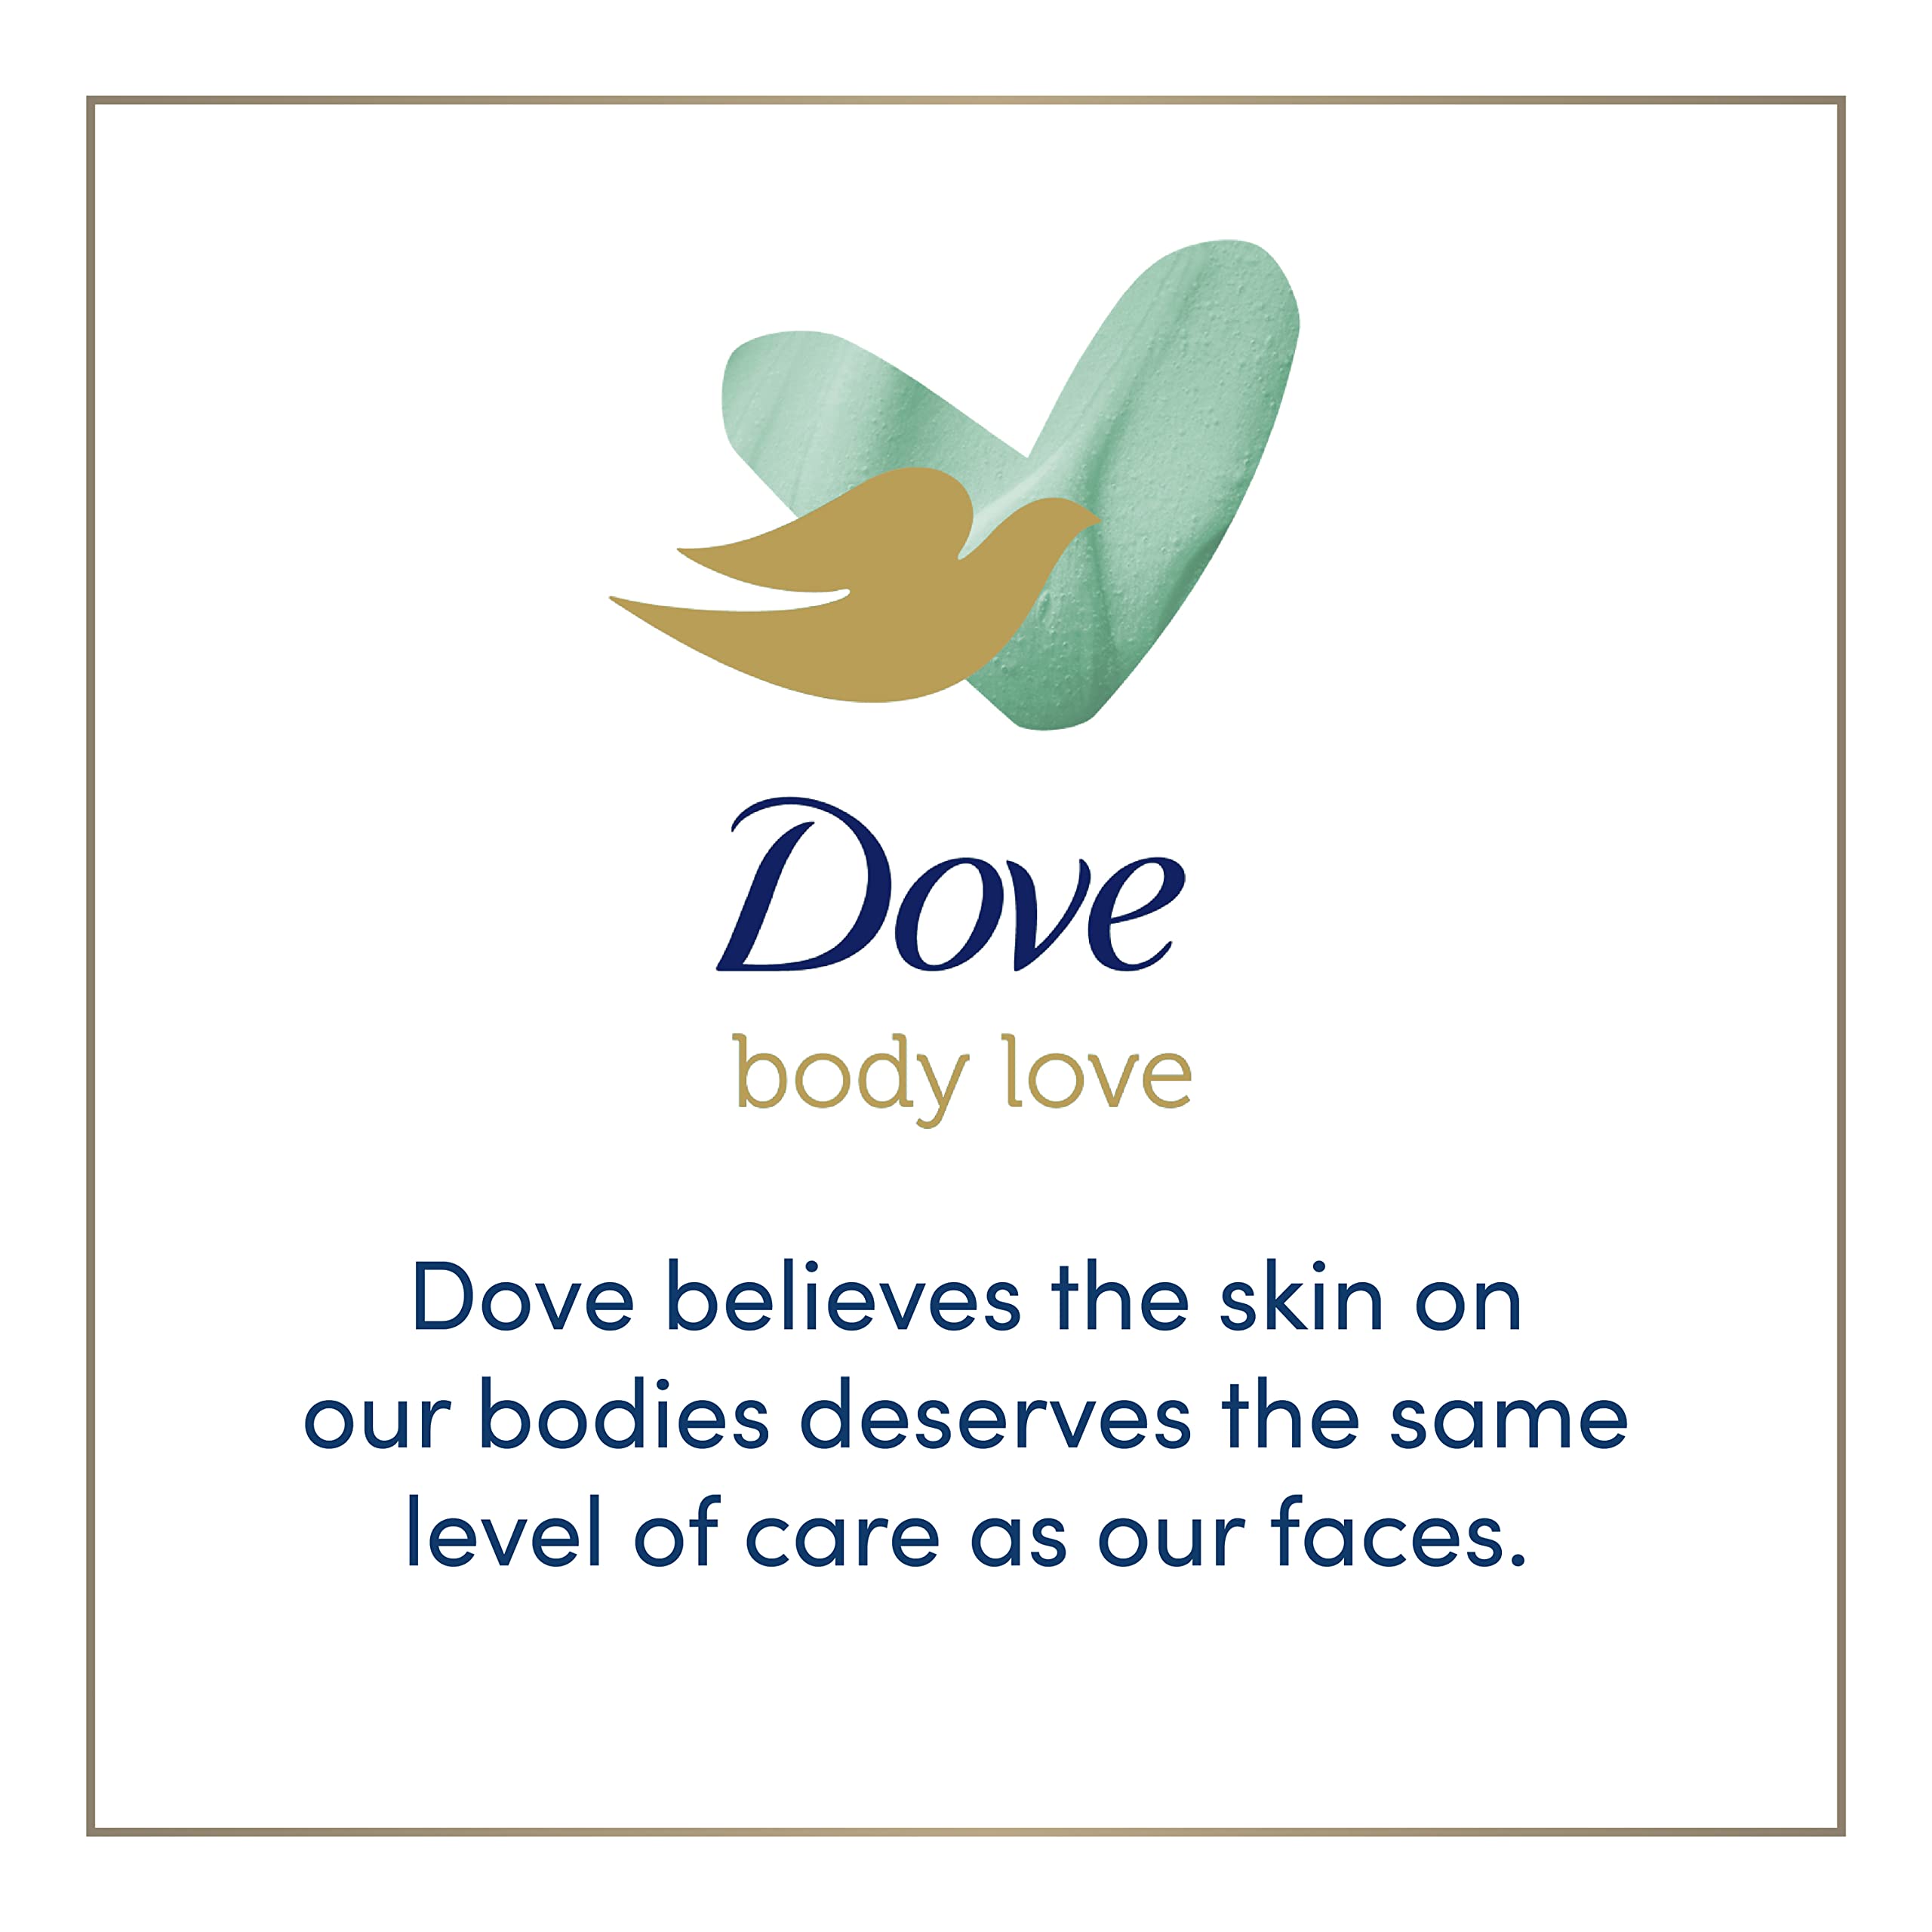 Dove Body Love Body Cleanser Acne Clear 4 Count For Acne-Prone Skin Body Wash with Salicylic Acid and Bamboo Extract 17.5 fl oz